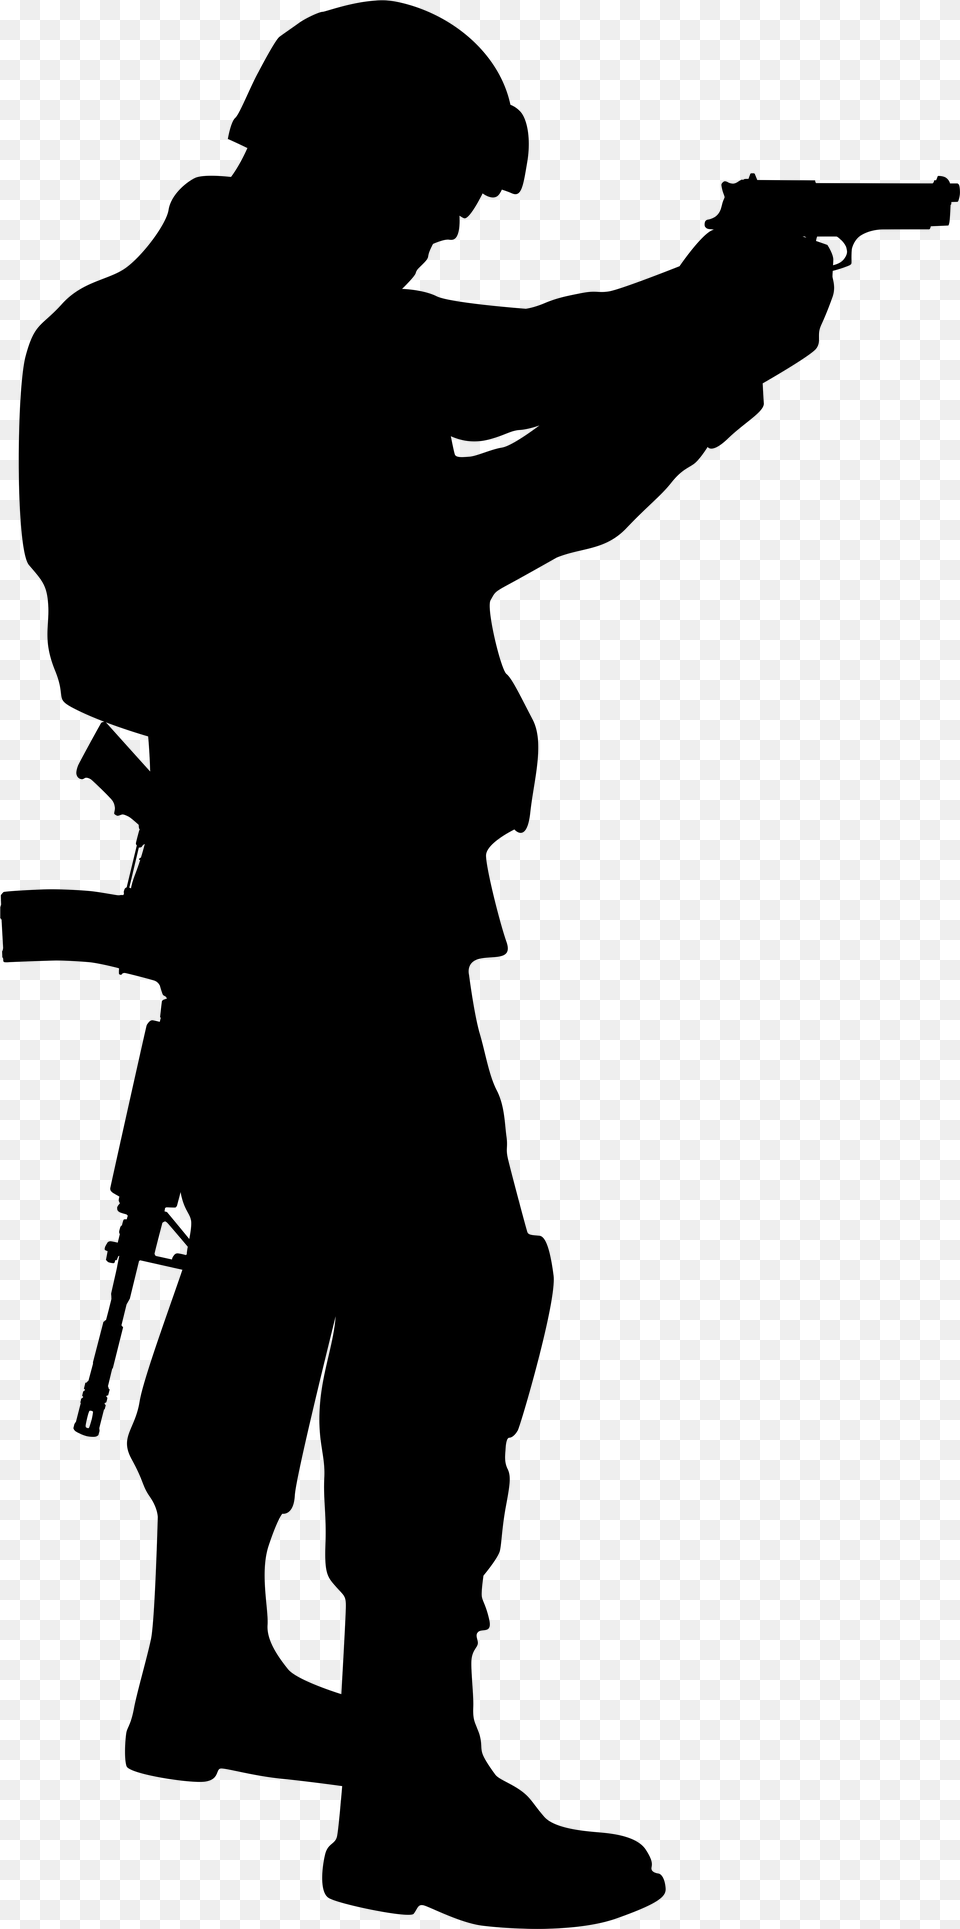 Soldier Silhouette Clip Art Imageu200b Gallery Yopriceville Soldier Silhouette, Gray Free Png Download